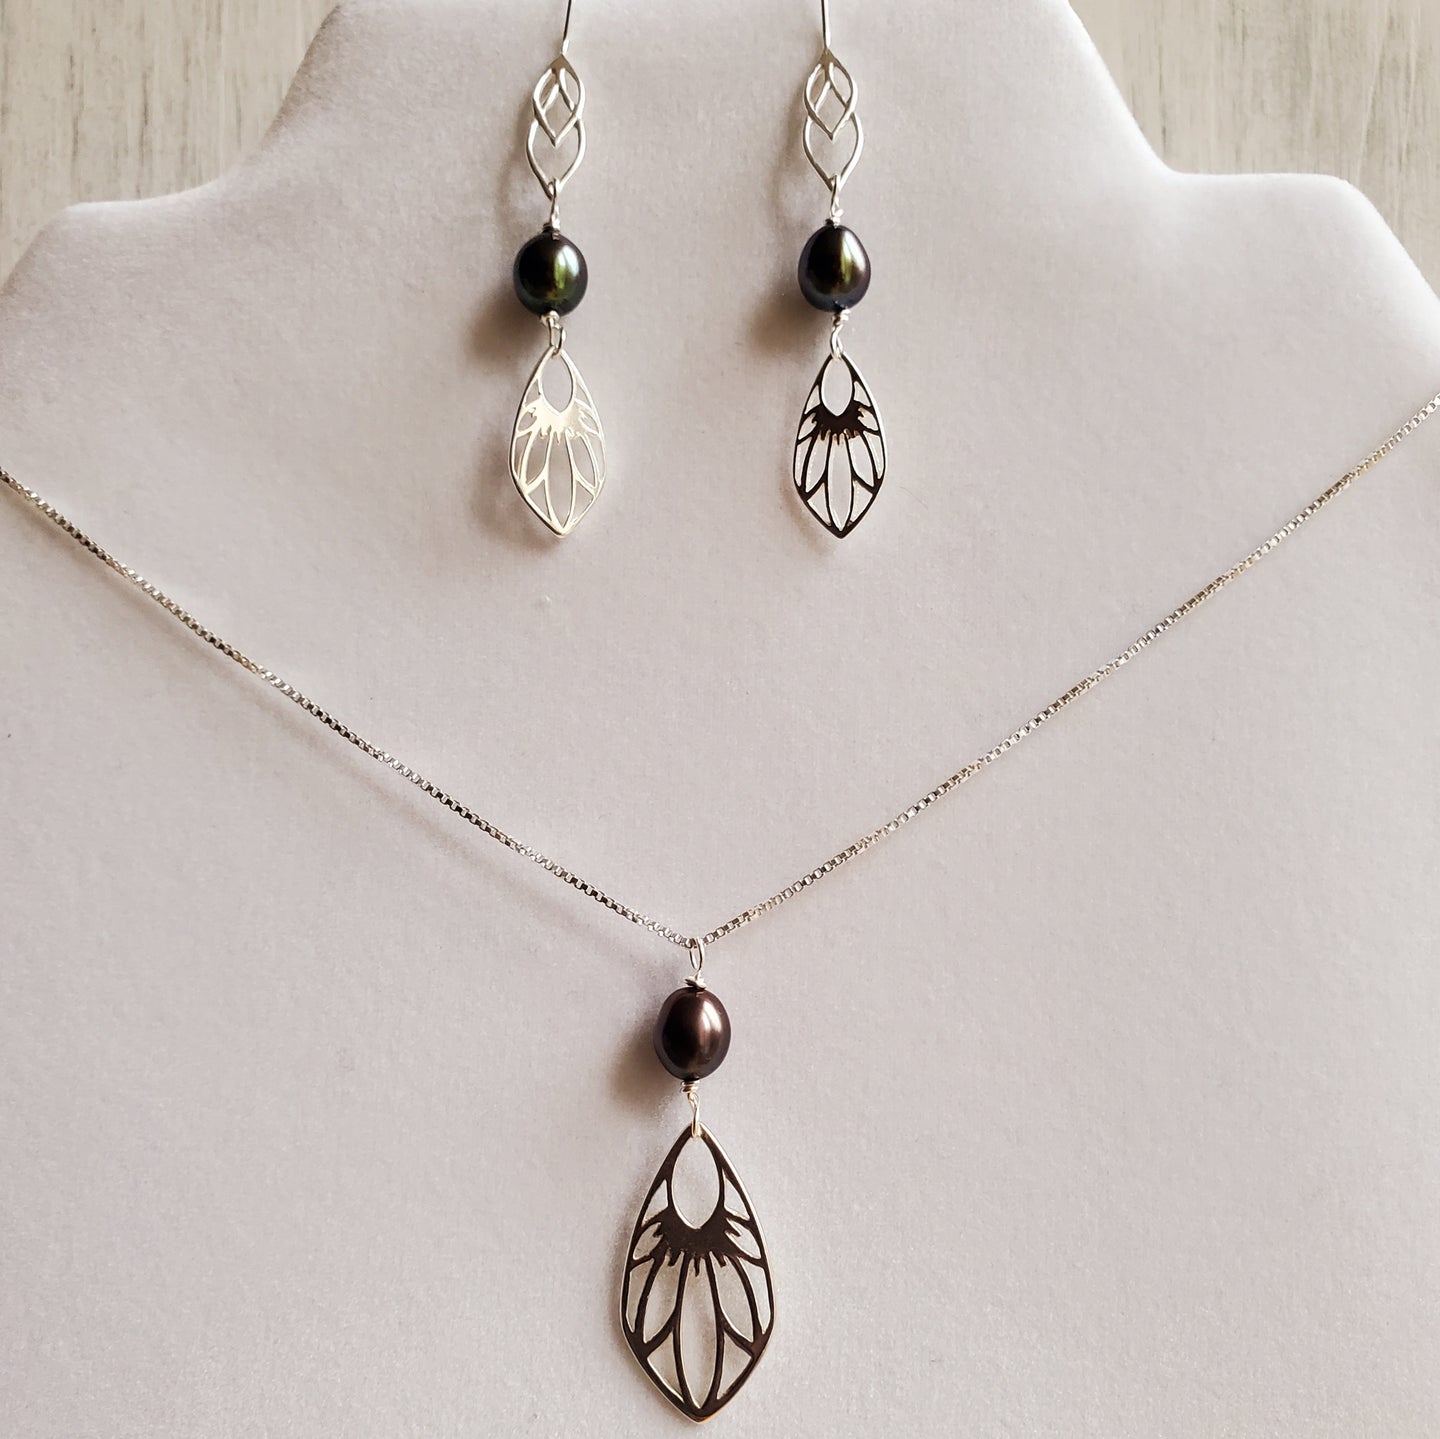 silver dragonfly wing necklace and earrings with black peacock freshwater pearls